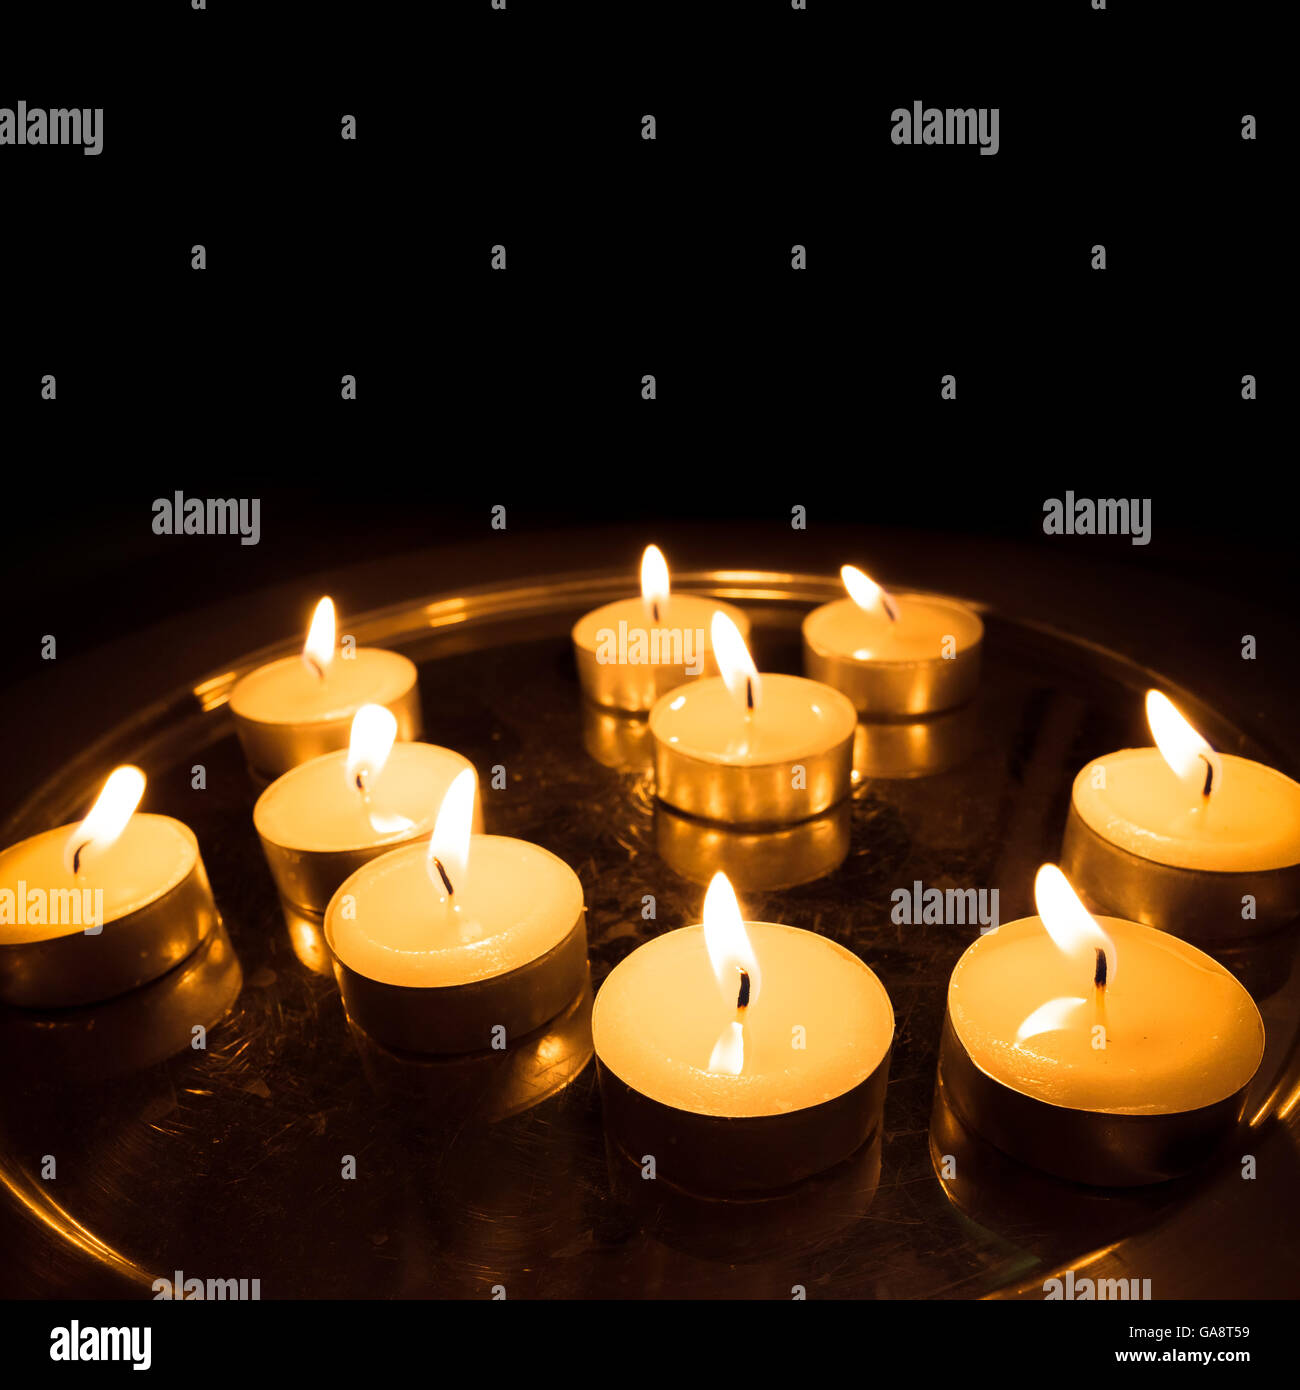 Pray candles burn on a metal stand in the church square photo with black copy-space on upper part Stock Photo